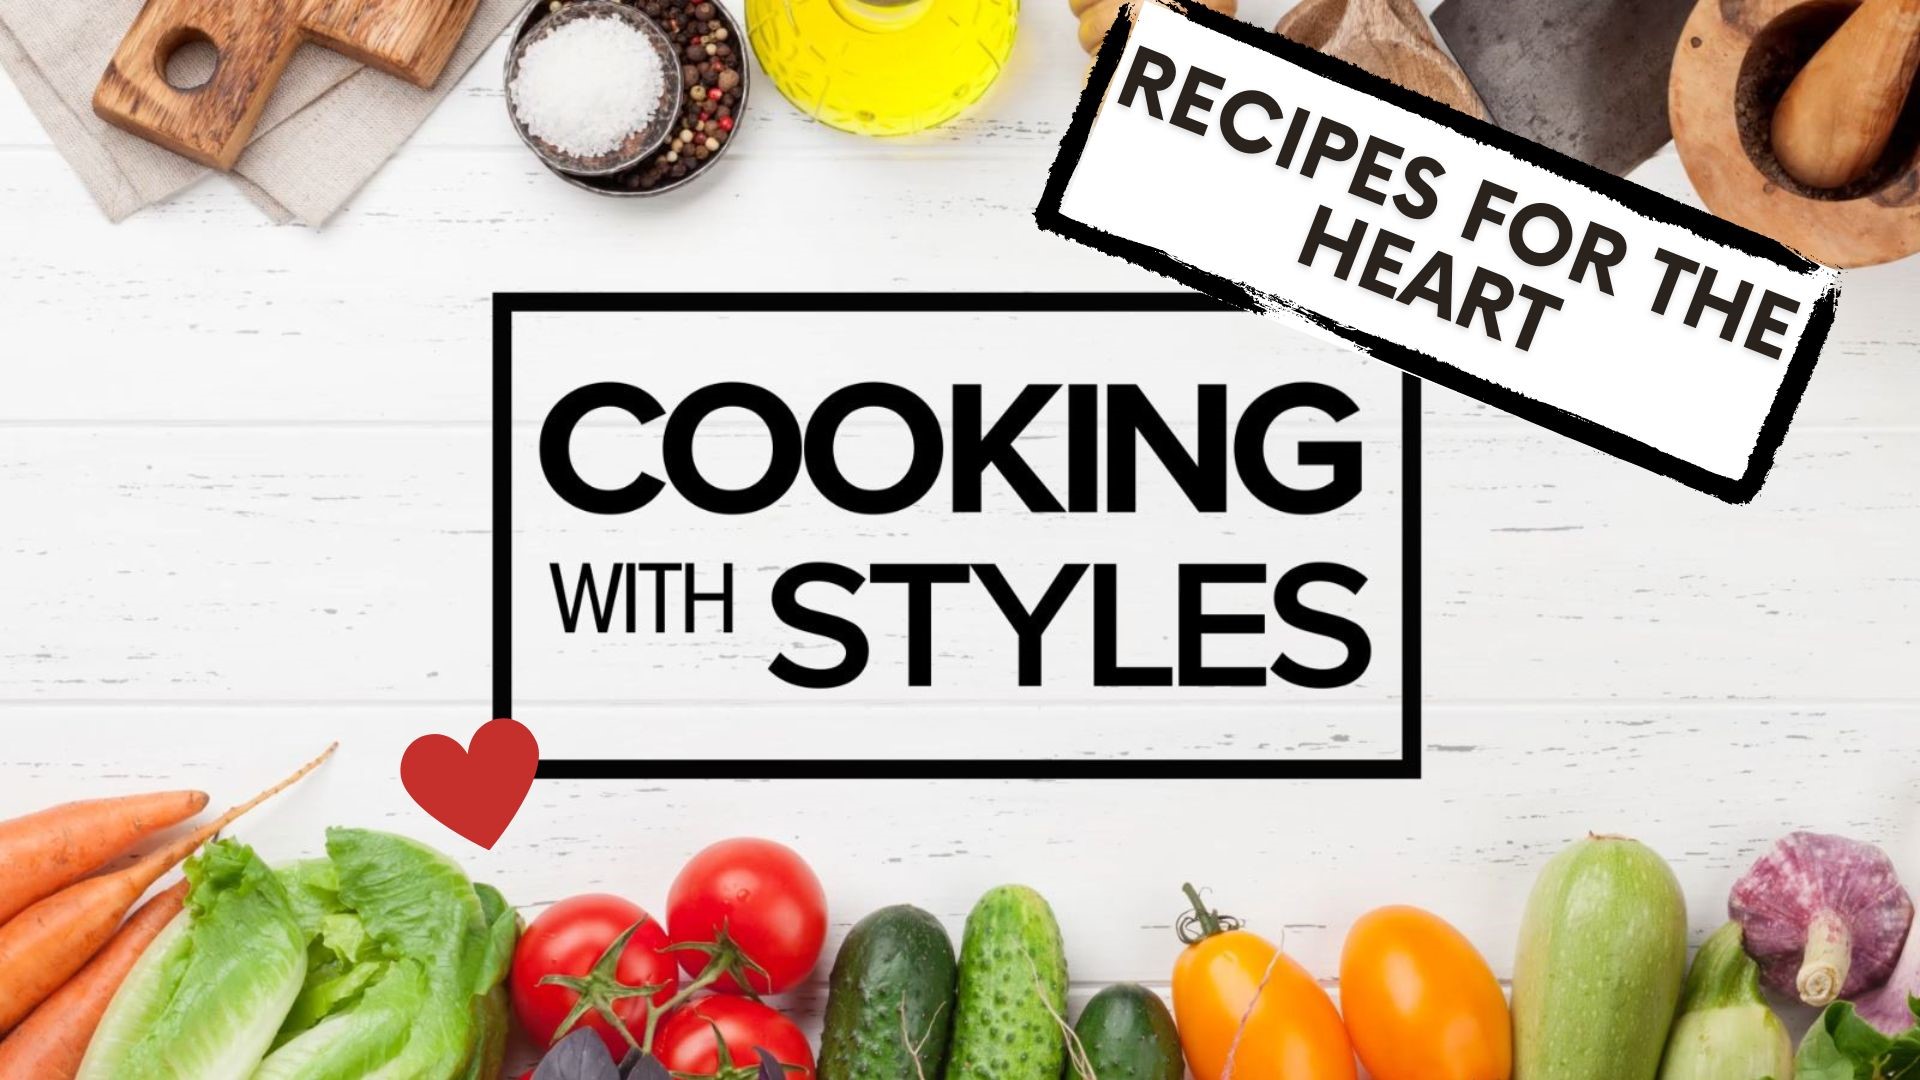 KFMB's Shawn Styles shares some heart healthy recipes, as well as some perfect dishes to serve to your Valentine.